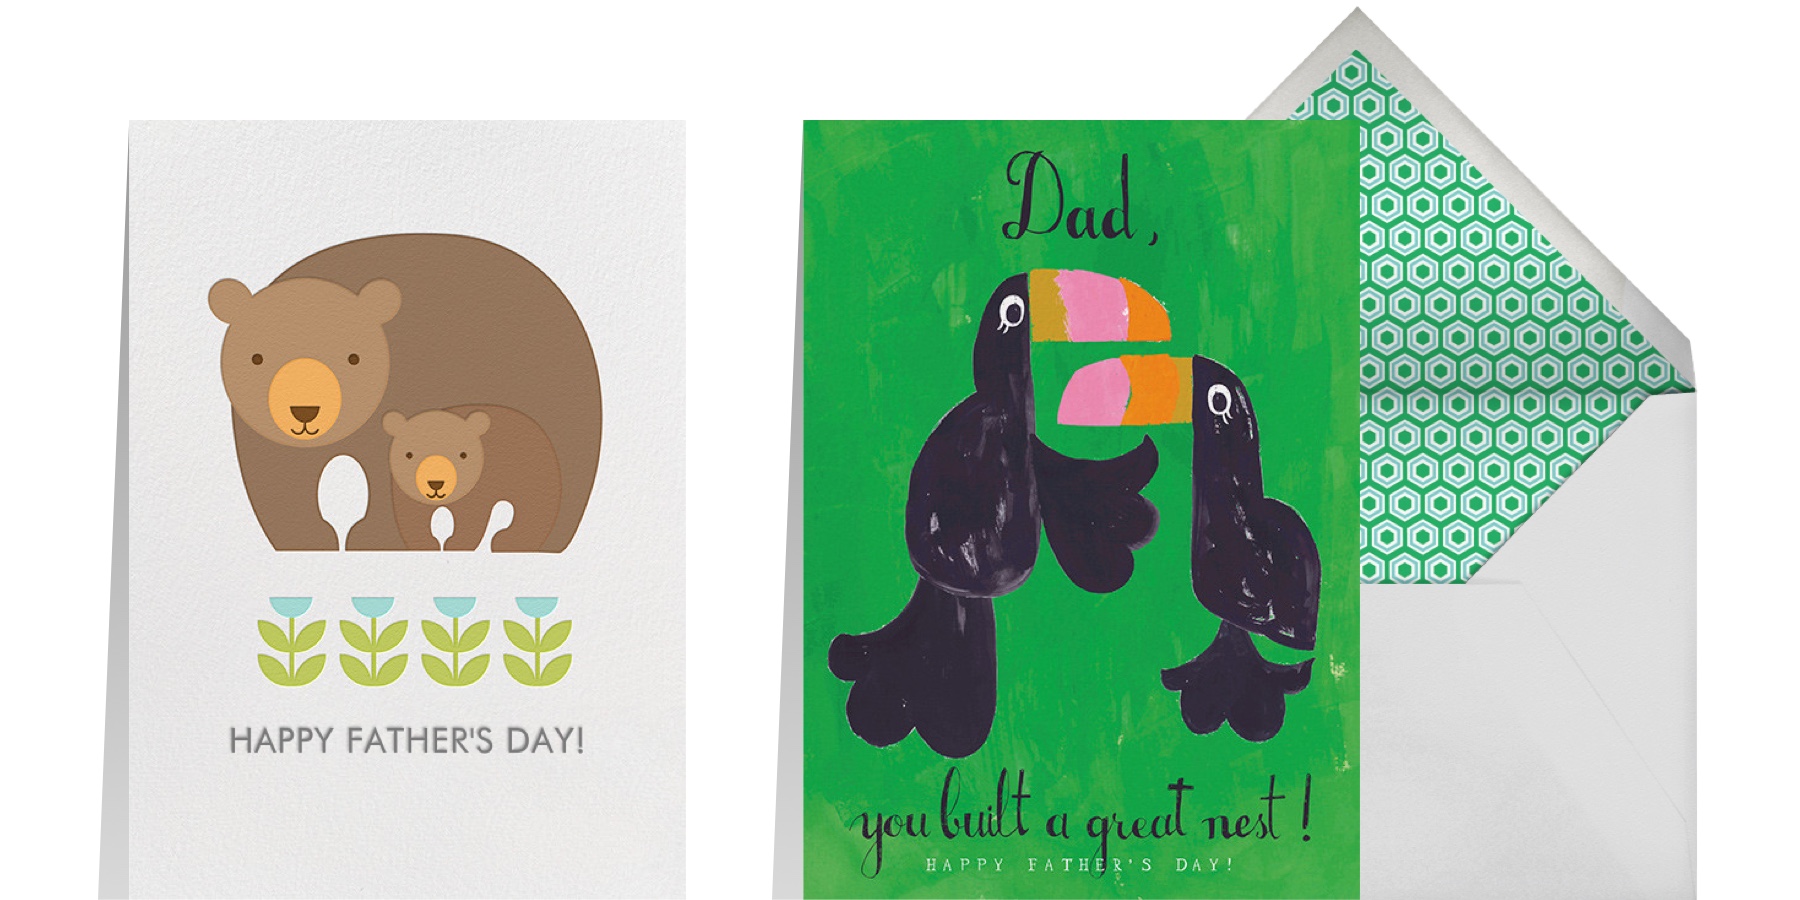 “Bear and Baby” by Petit Collage for Paperless Post and “The Best Nest” by Mr. Boddington’s Studio for Paperless Post